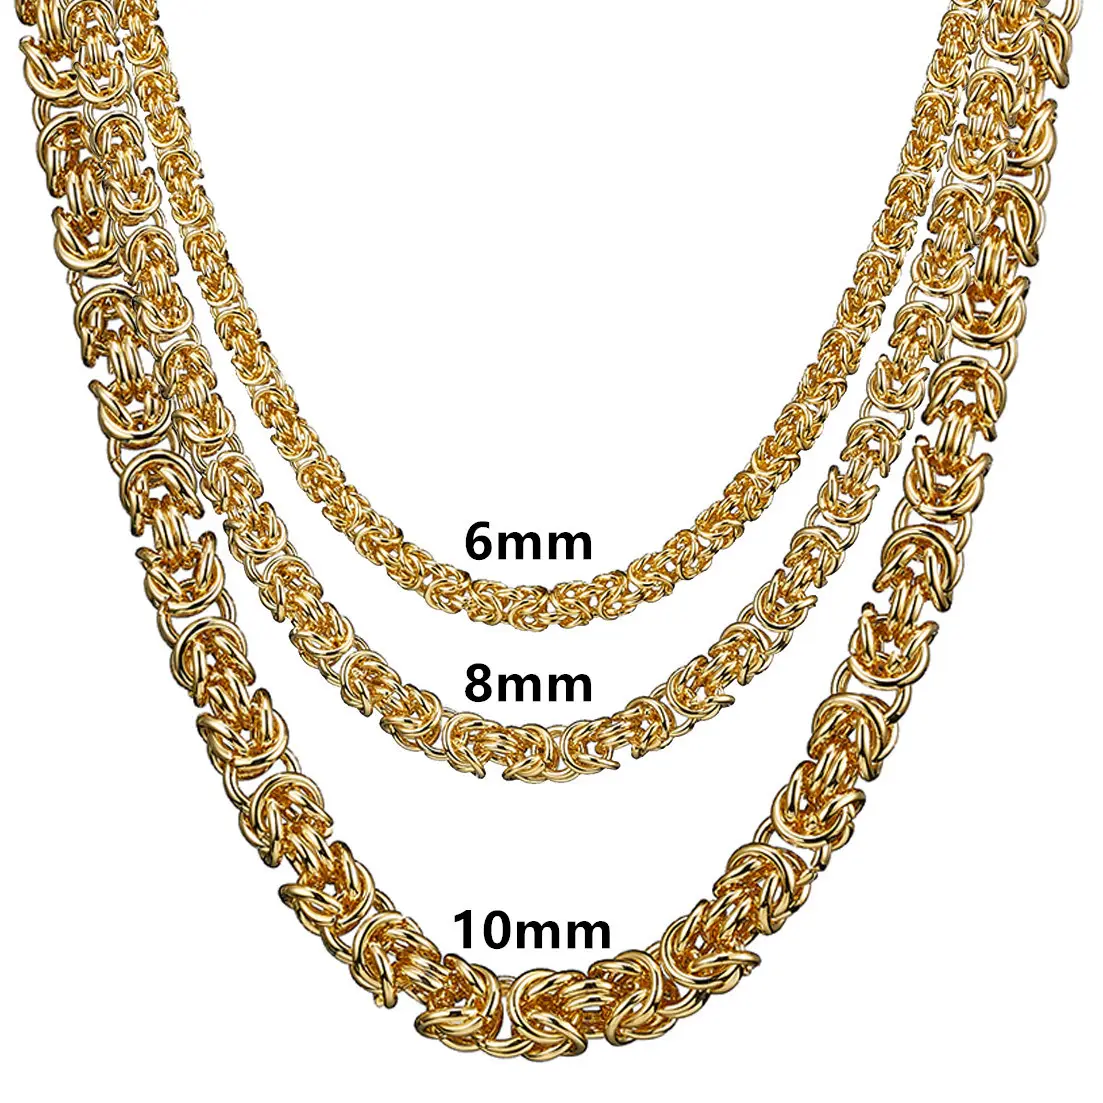 Fashion Personality 316L Stainless steel 18K Handcrafted Necklace Byzantine Centipede Chain Gold Necklace for Men